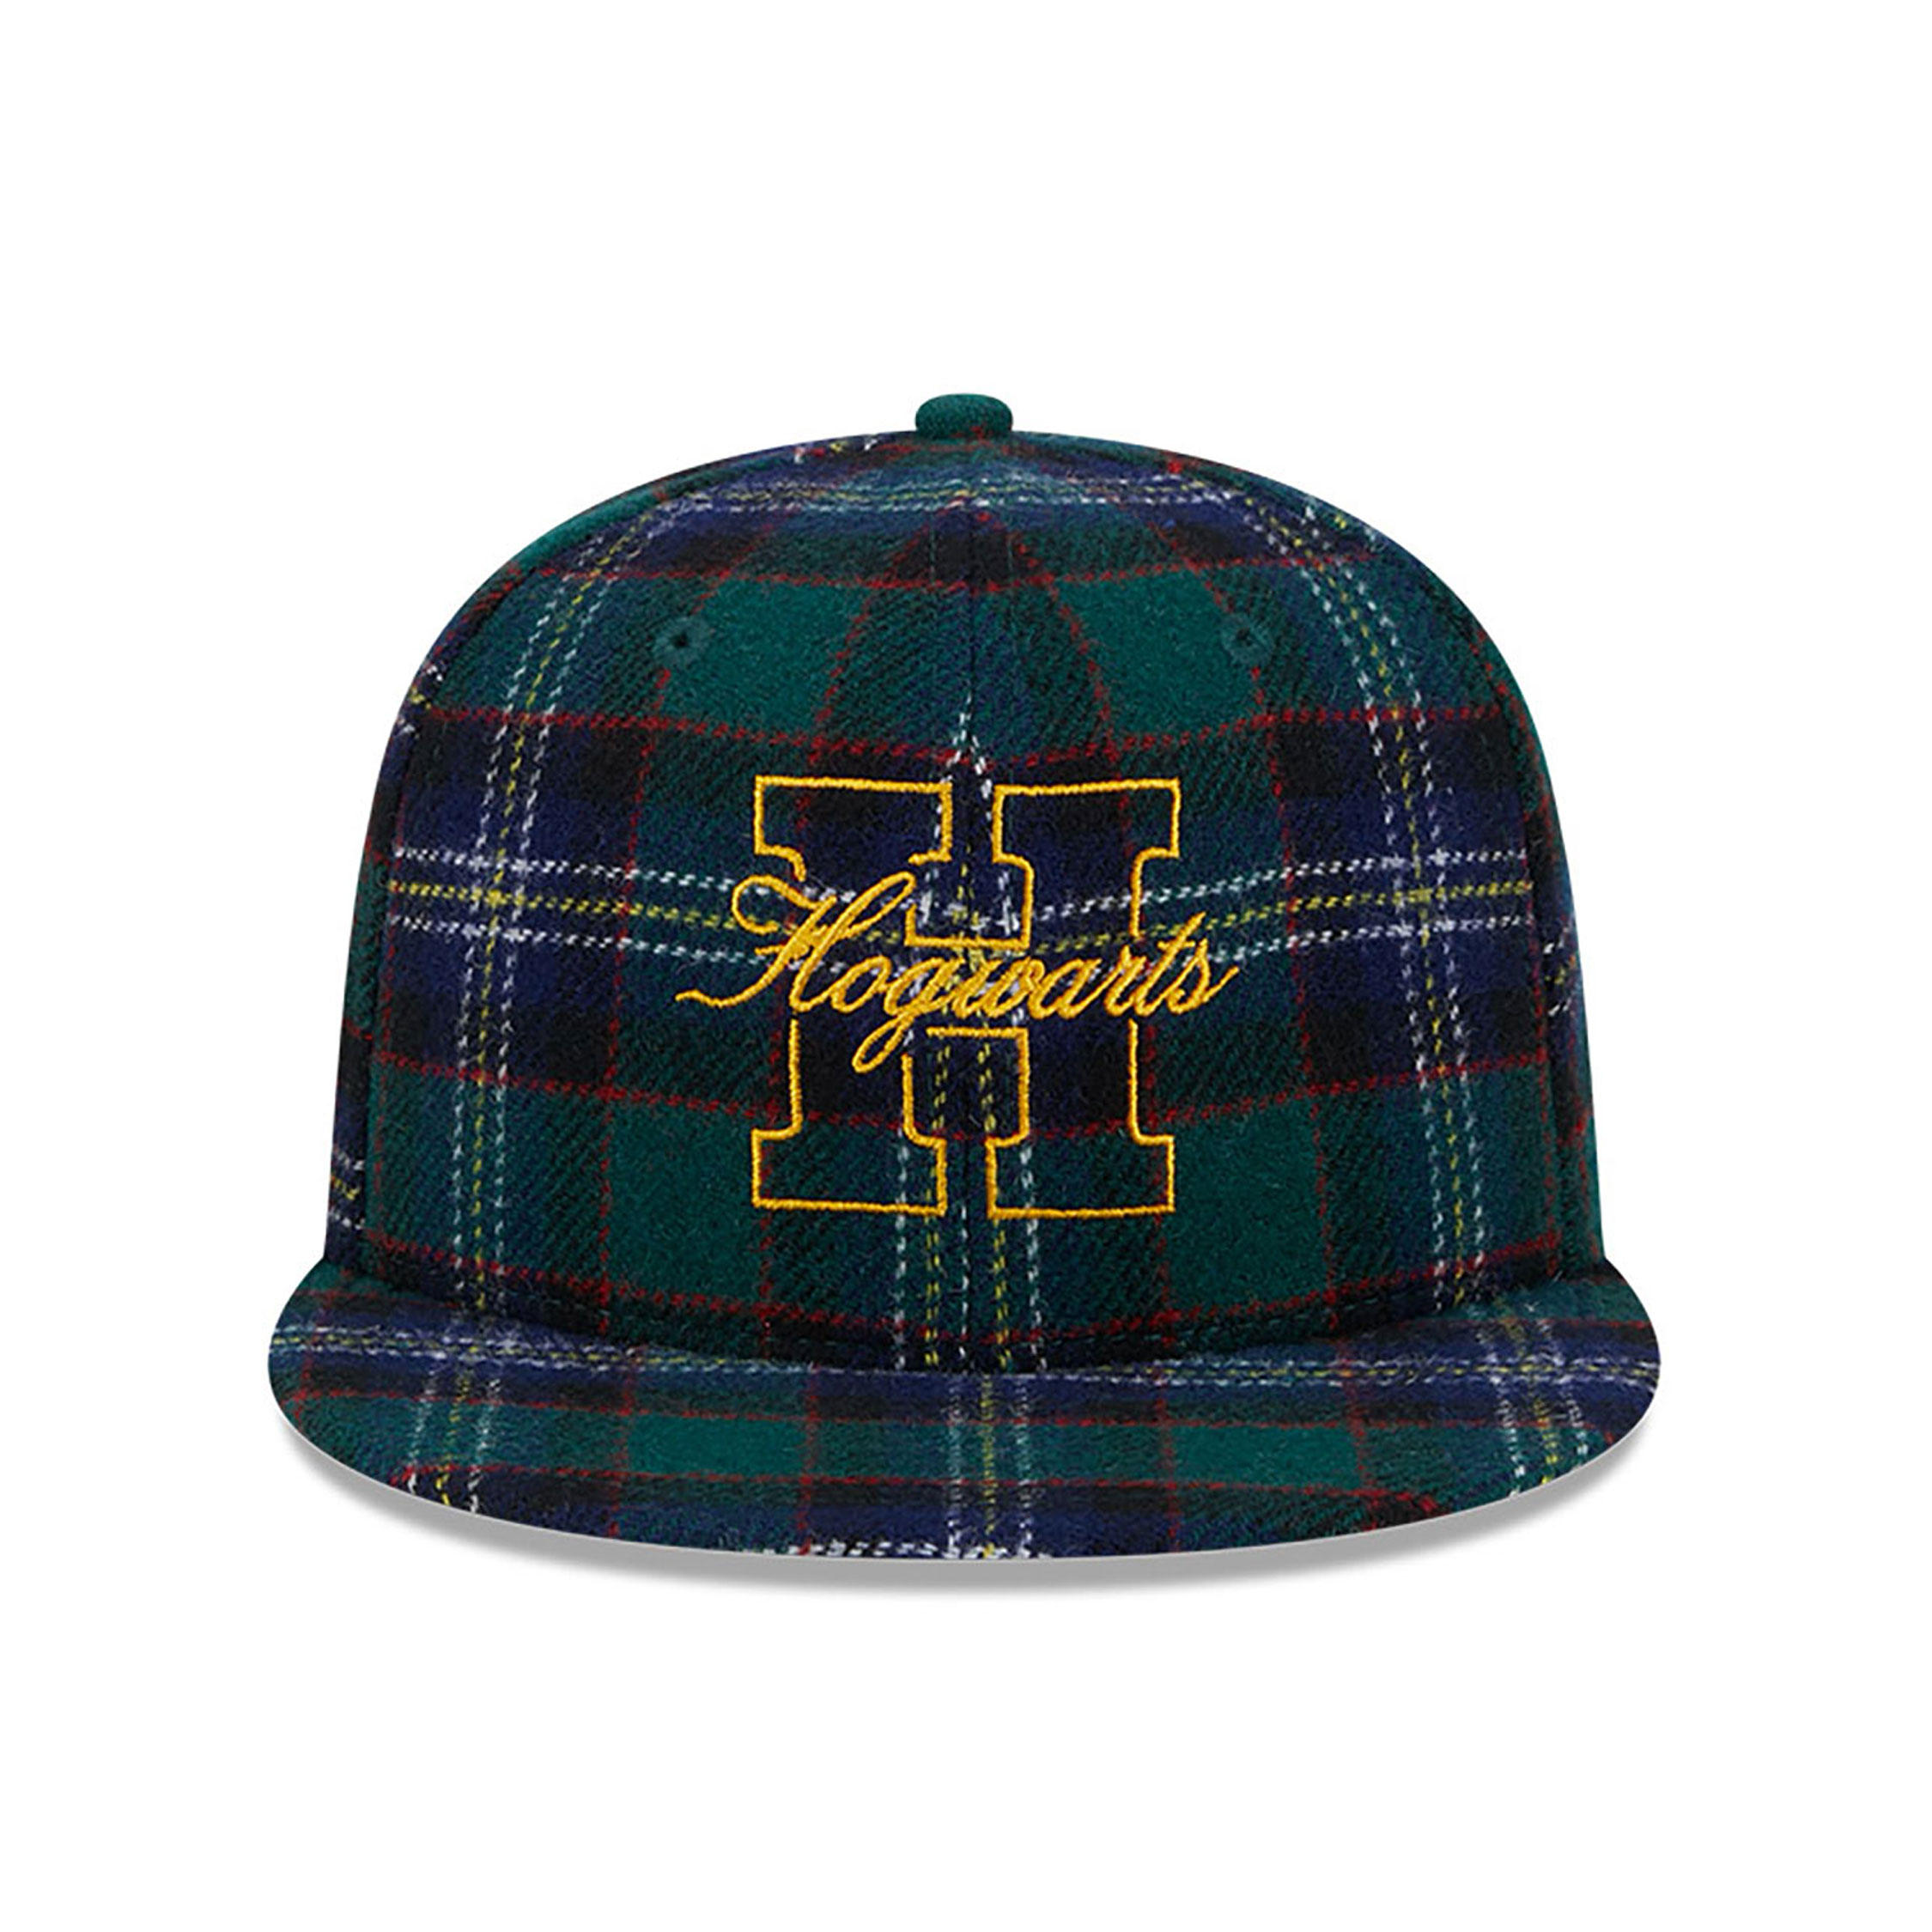 Harry Potter and the Deathly Hallows Part 2 Hogwarts Plaid Dark Green 59FIFTY Fitted Cap